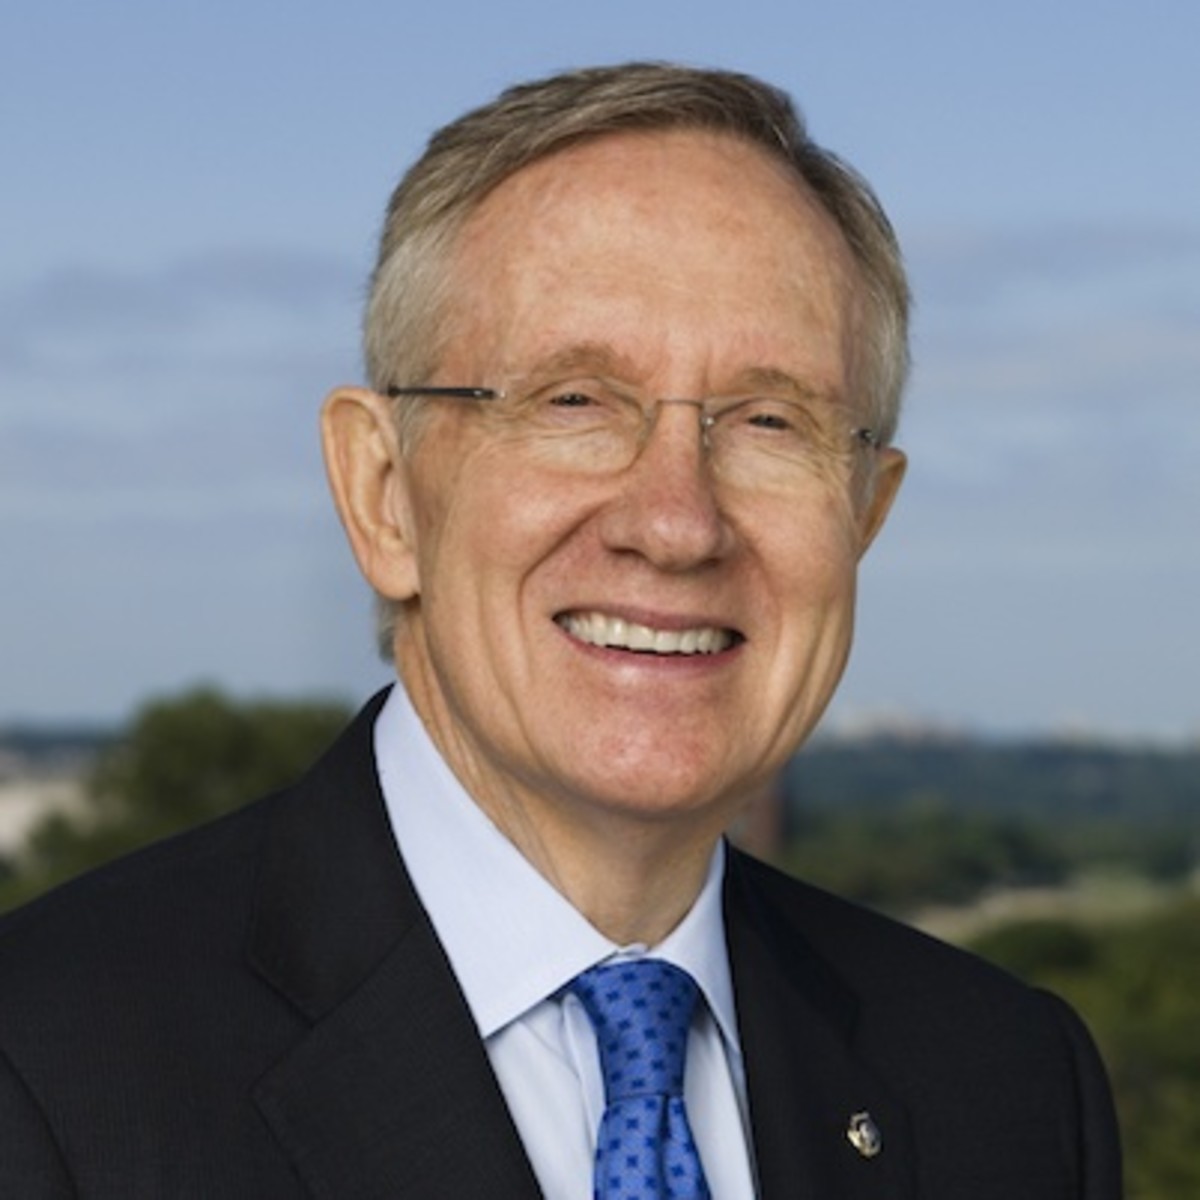  Harry Reid, former Democratic Senator from Nevada,&nbsp;who pushed for funding of the Advanced Aerospace Threat Identification Program while he was Senate majority leader. 